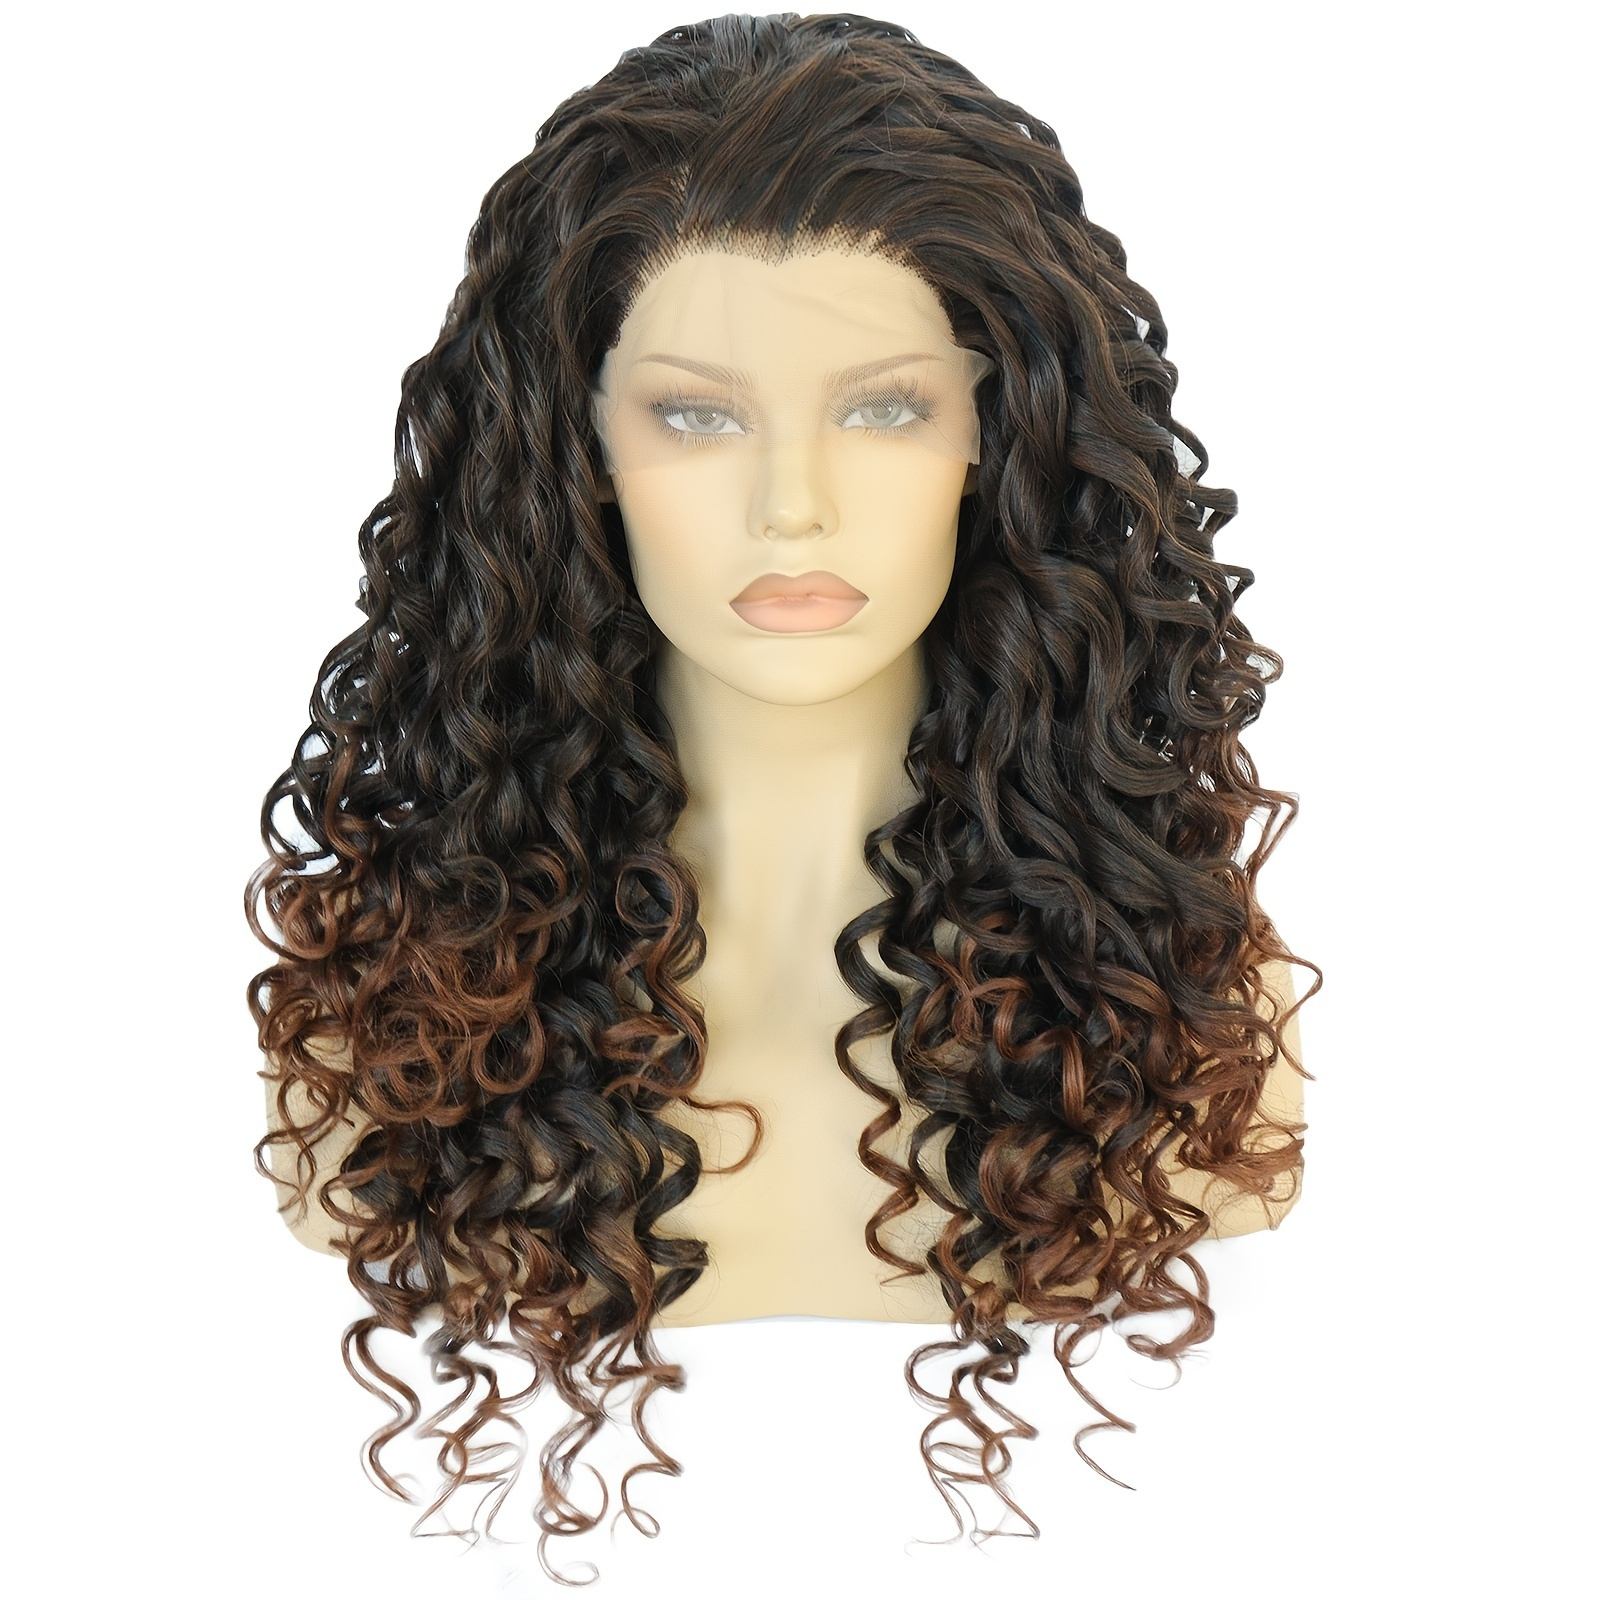 13 3 2 Tone Black Ombre Red Curly Synthetic Lace Front Wig For Women 1pc Wig Cap